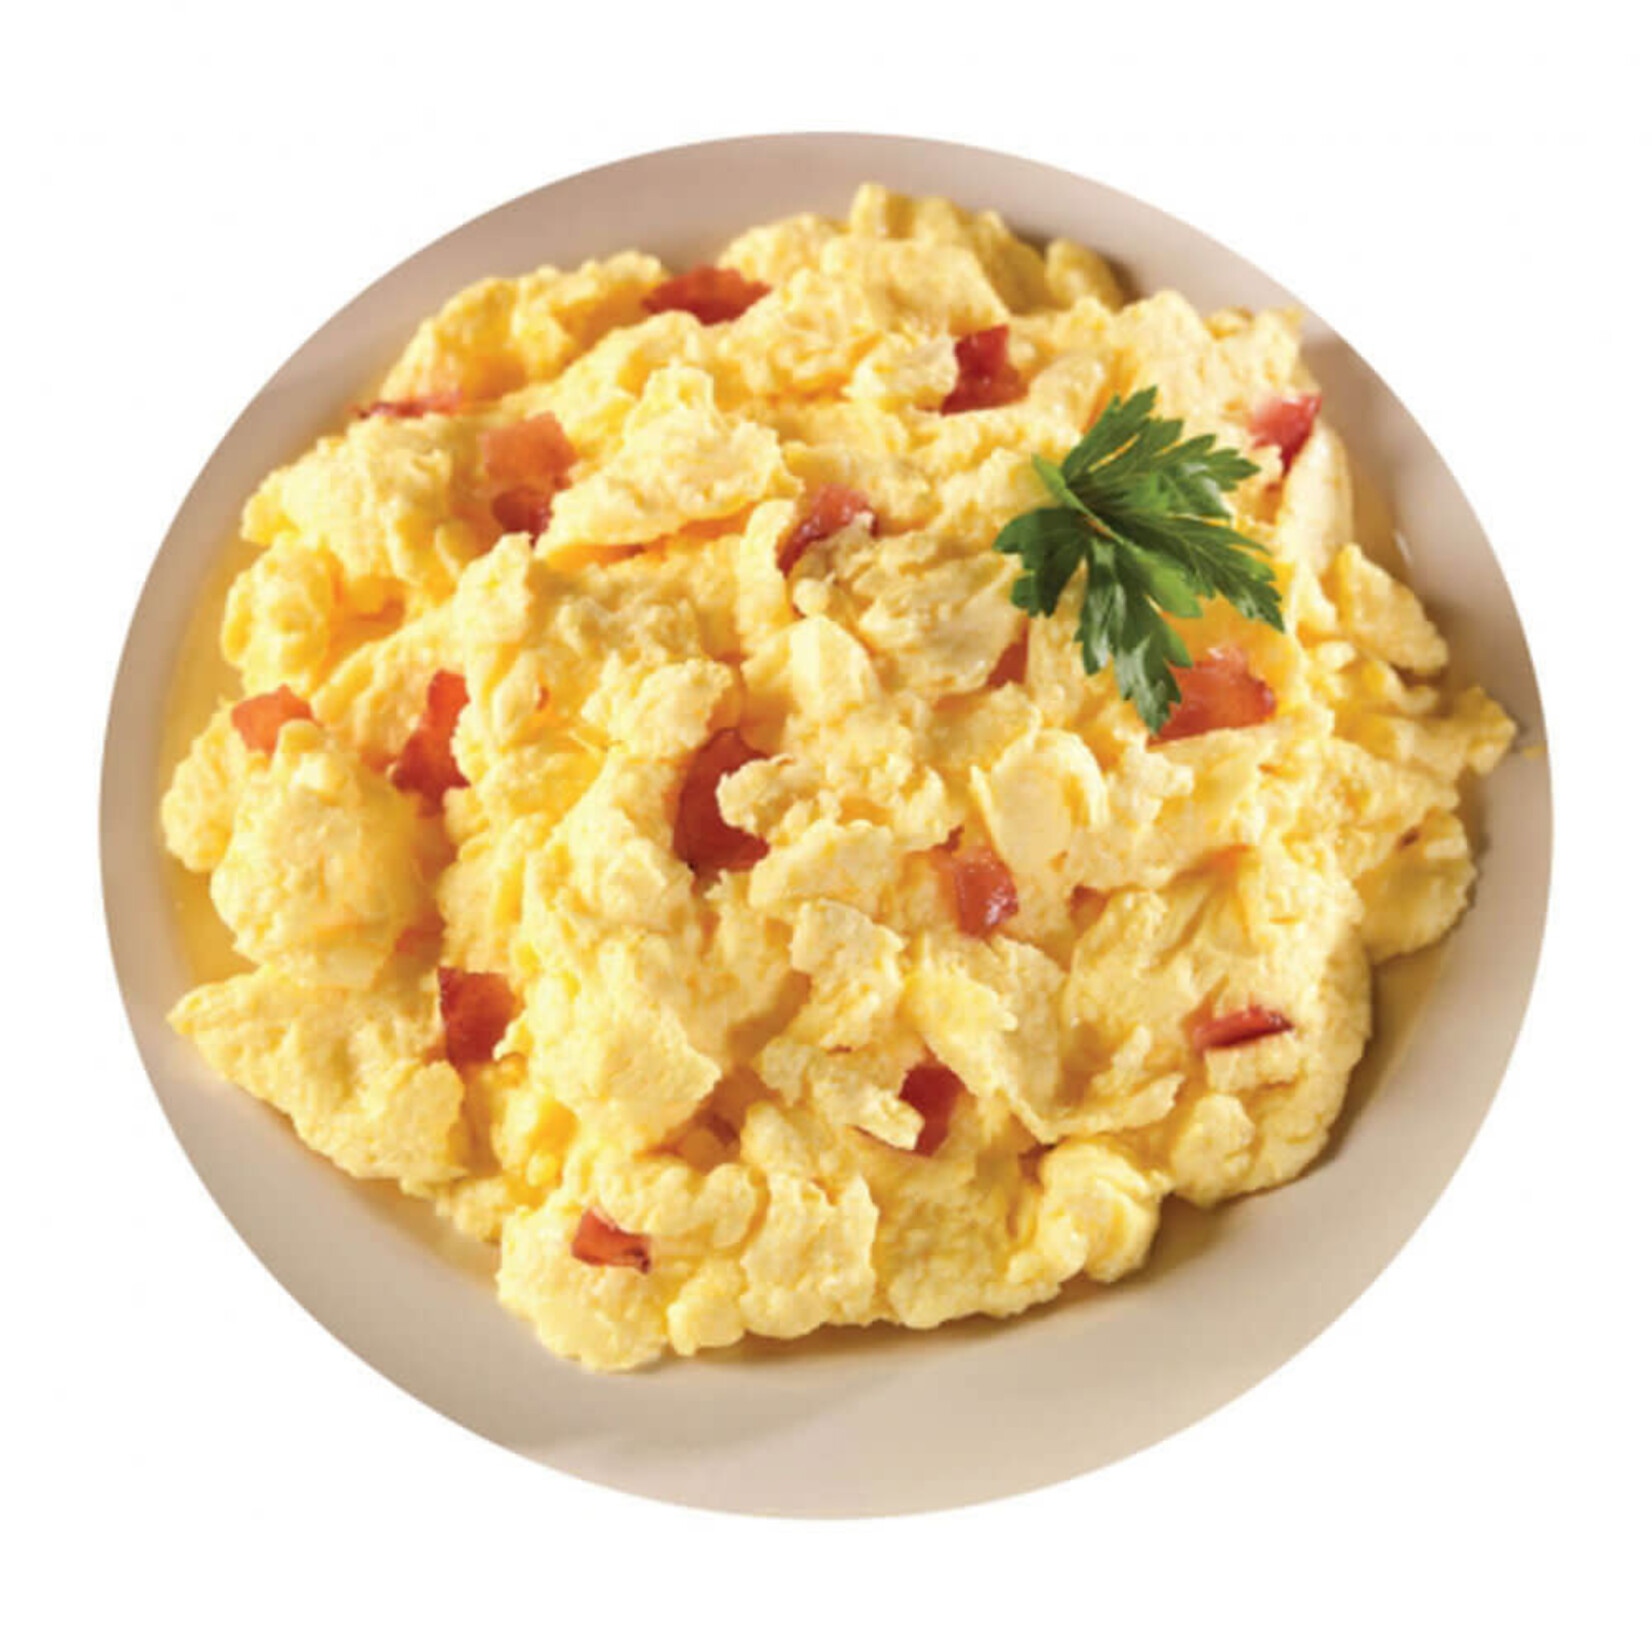 MOUNTAIN HOUSE Scrambled Eggs with Bacon  #10 Can 8 servings XL